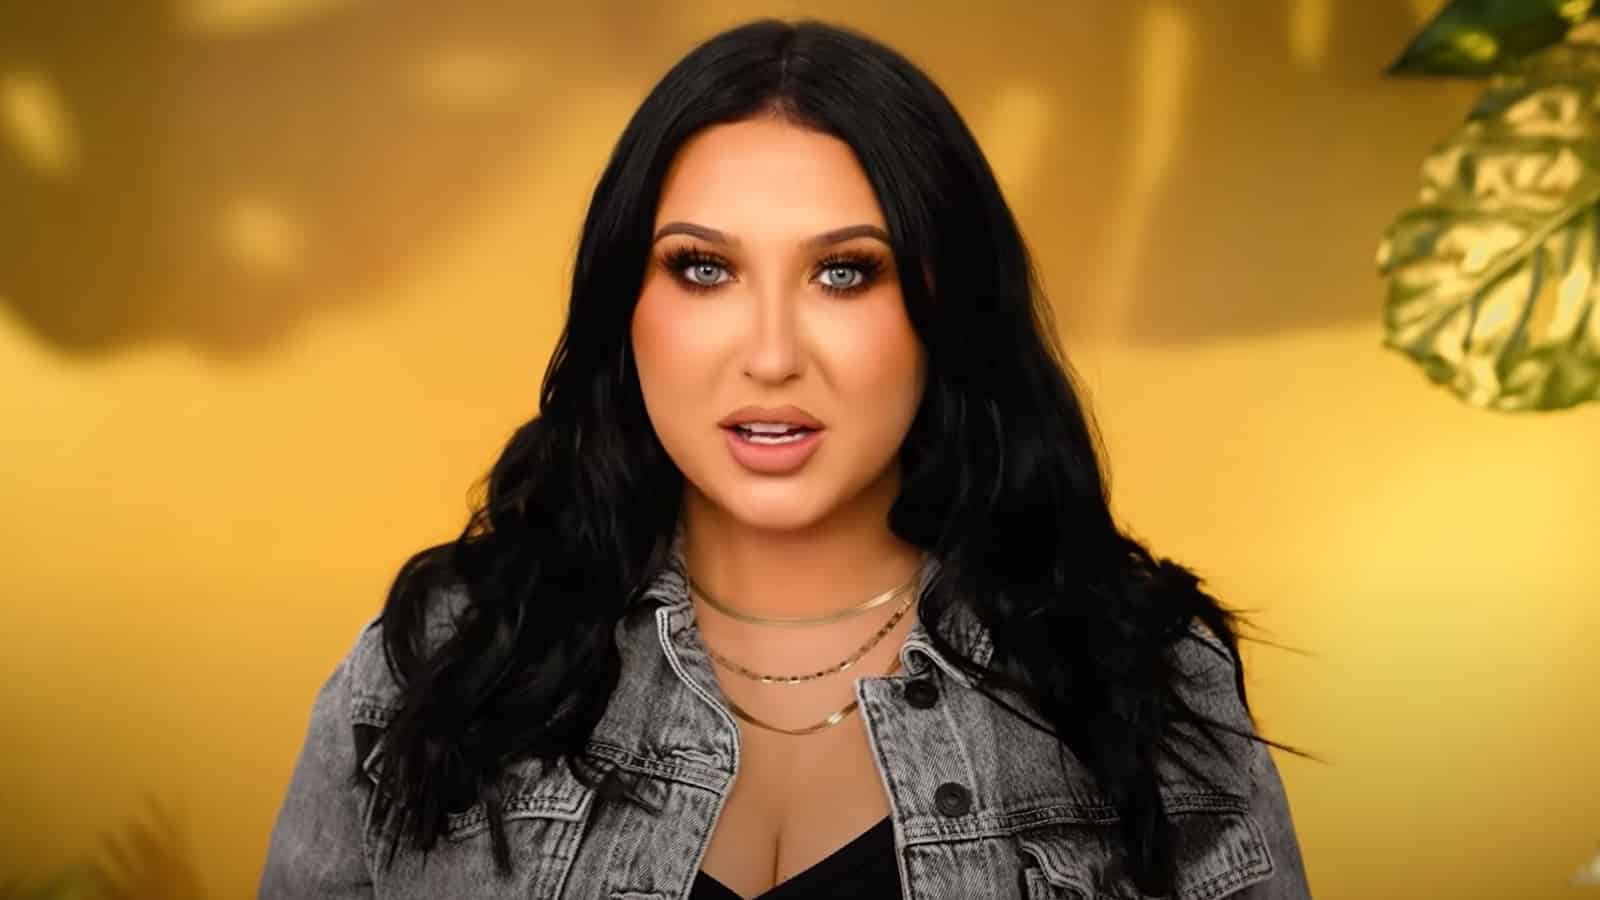 Jaclyn Hill Returns to Social Media Amid Backlash Over Refunds